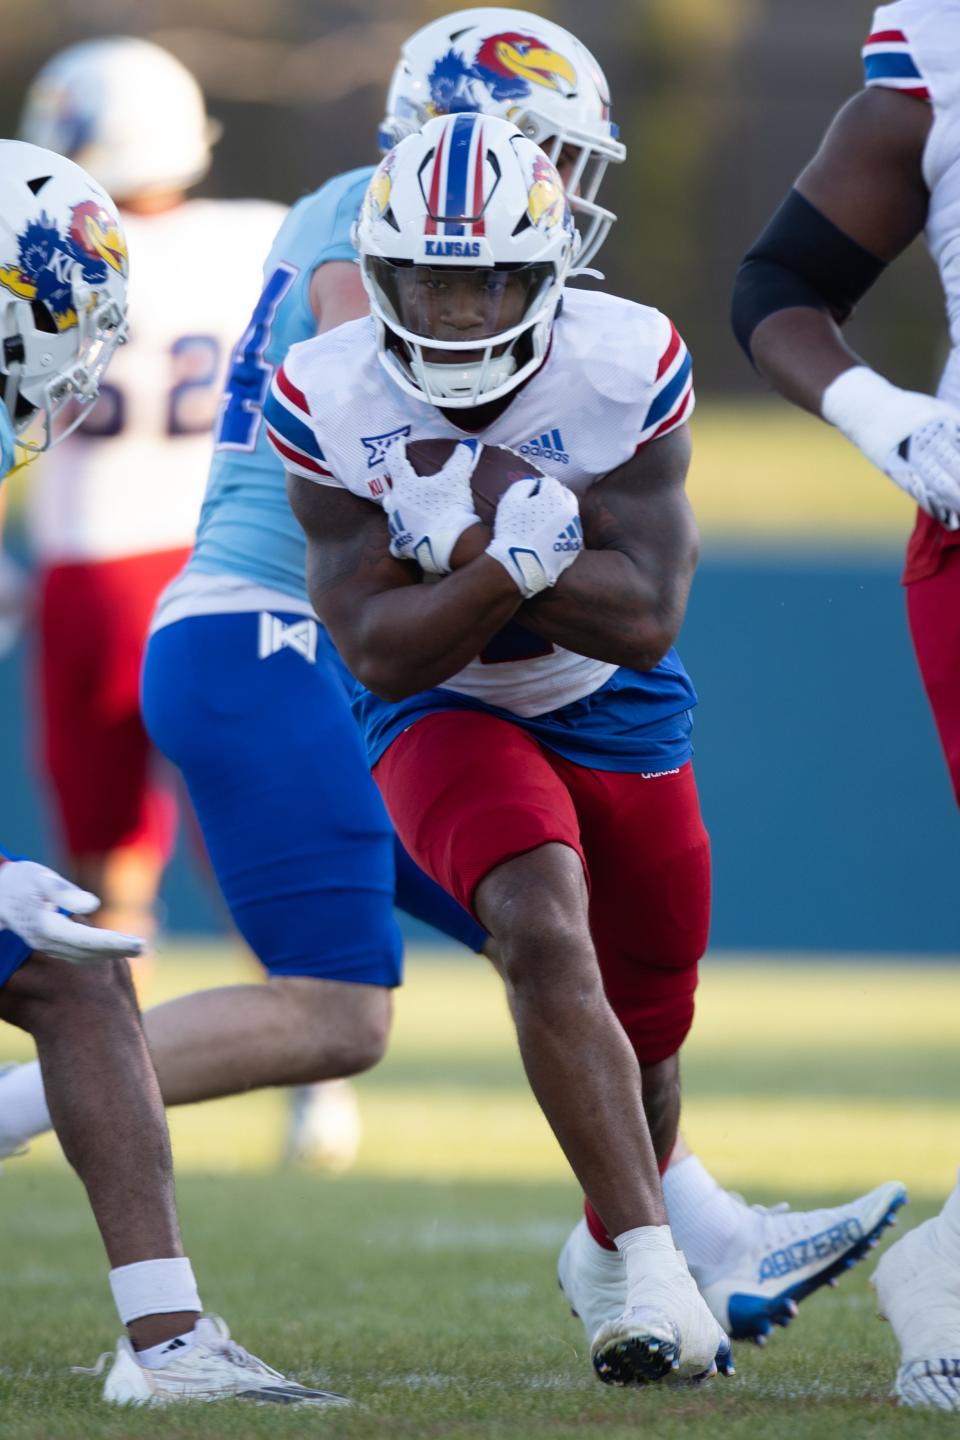 Kansas football senior running back Devin Neal (4) makes a play during Friday's spring showcase event at Rock Chalk Park in Lawrence.